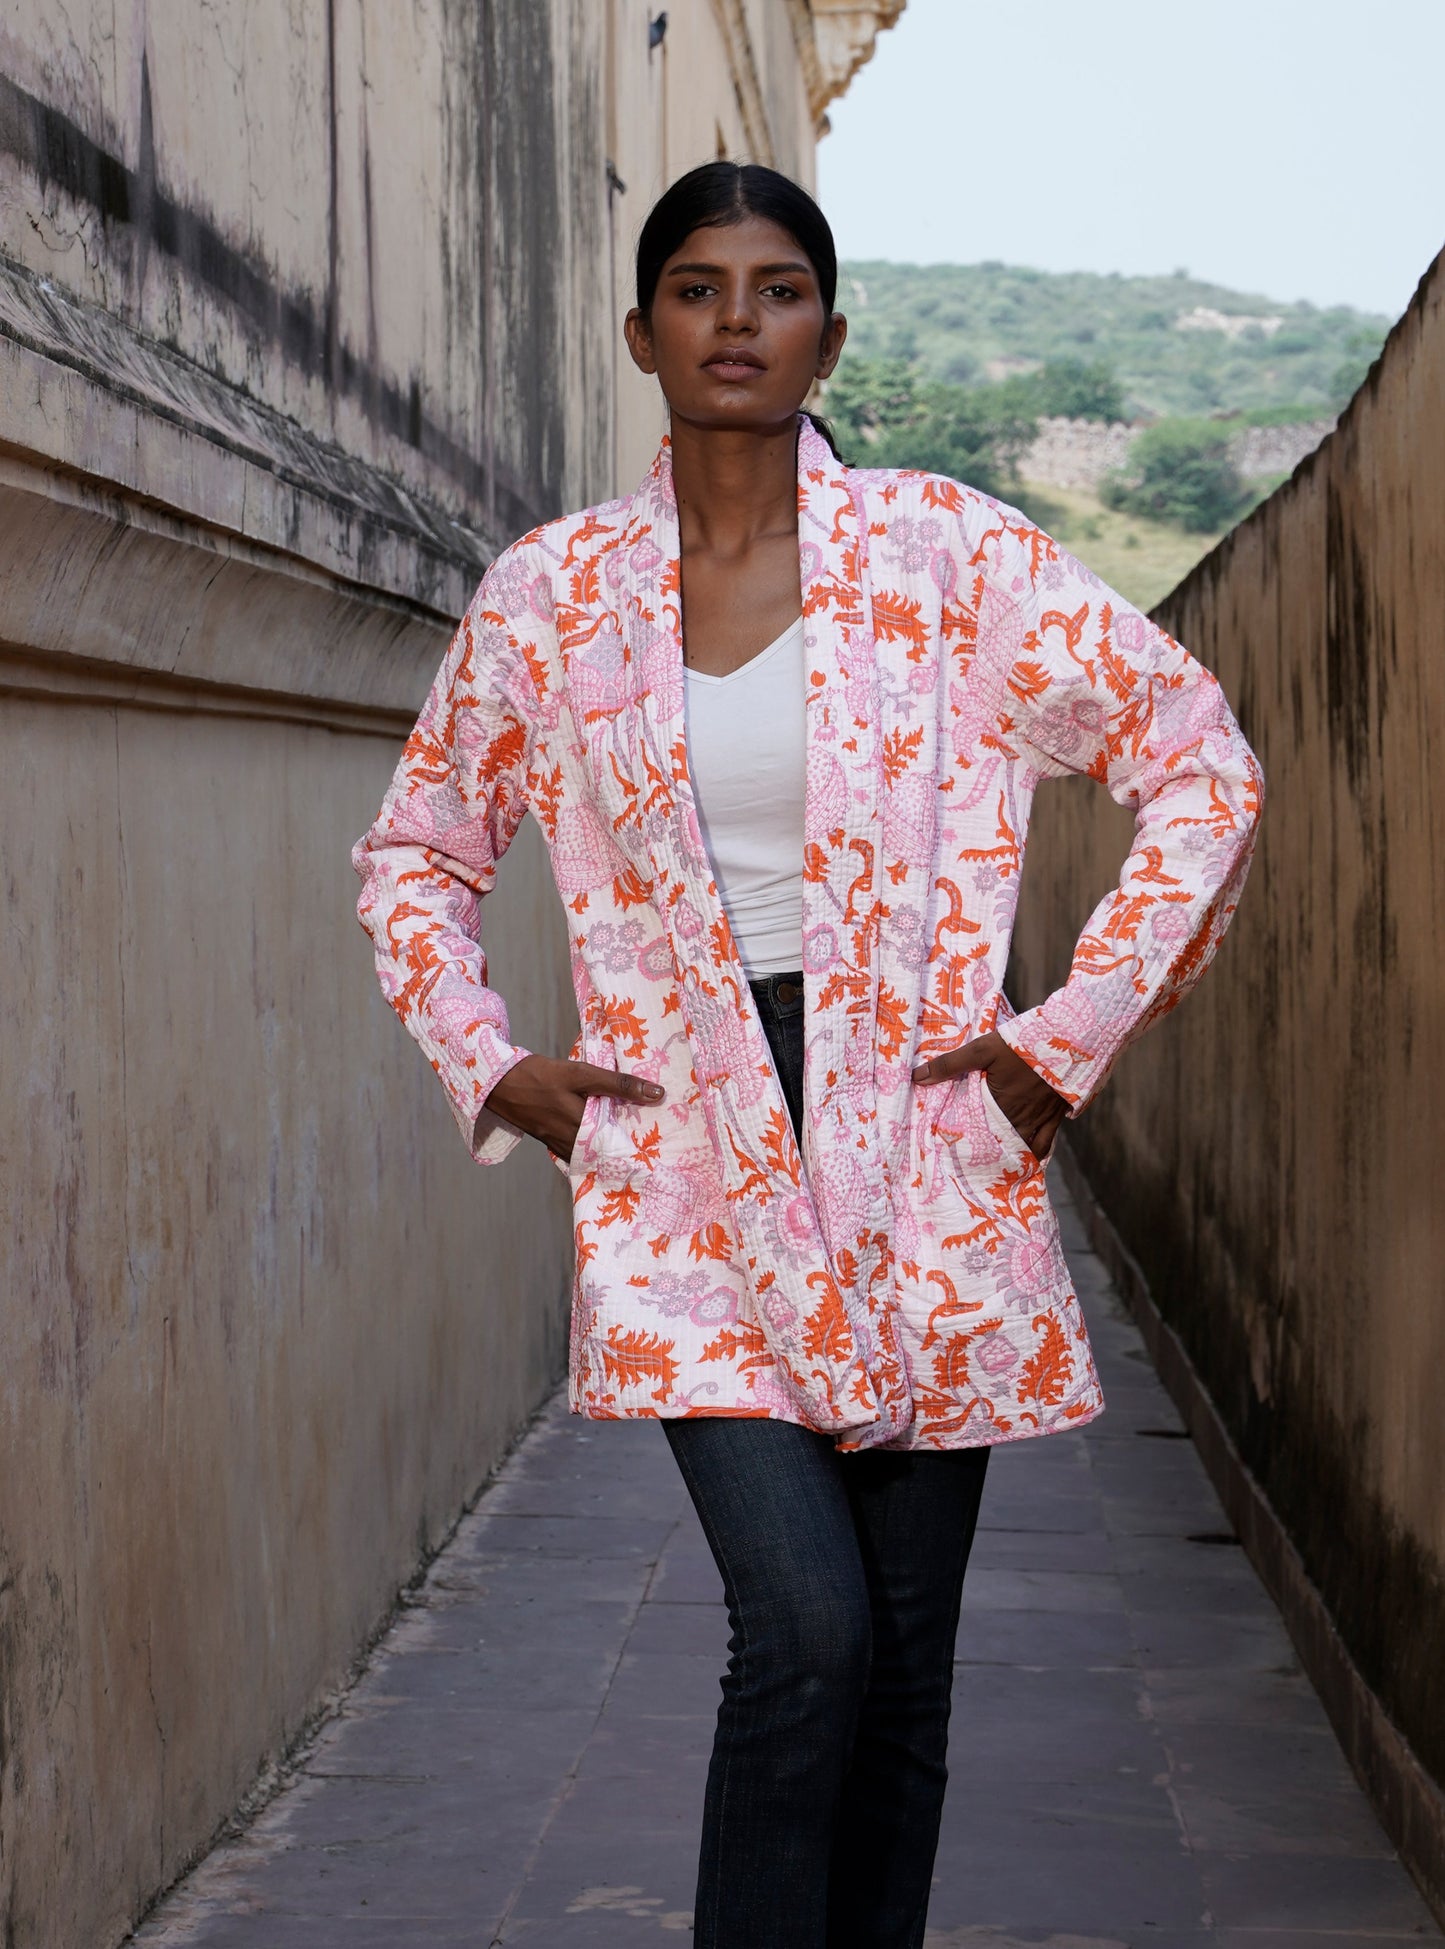 Quilted women's cotton kimono jacket with floral design